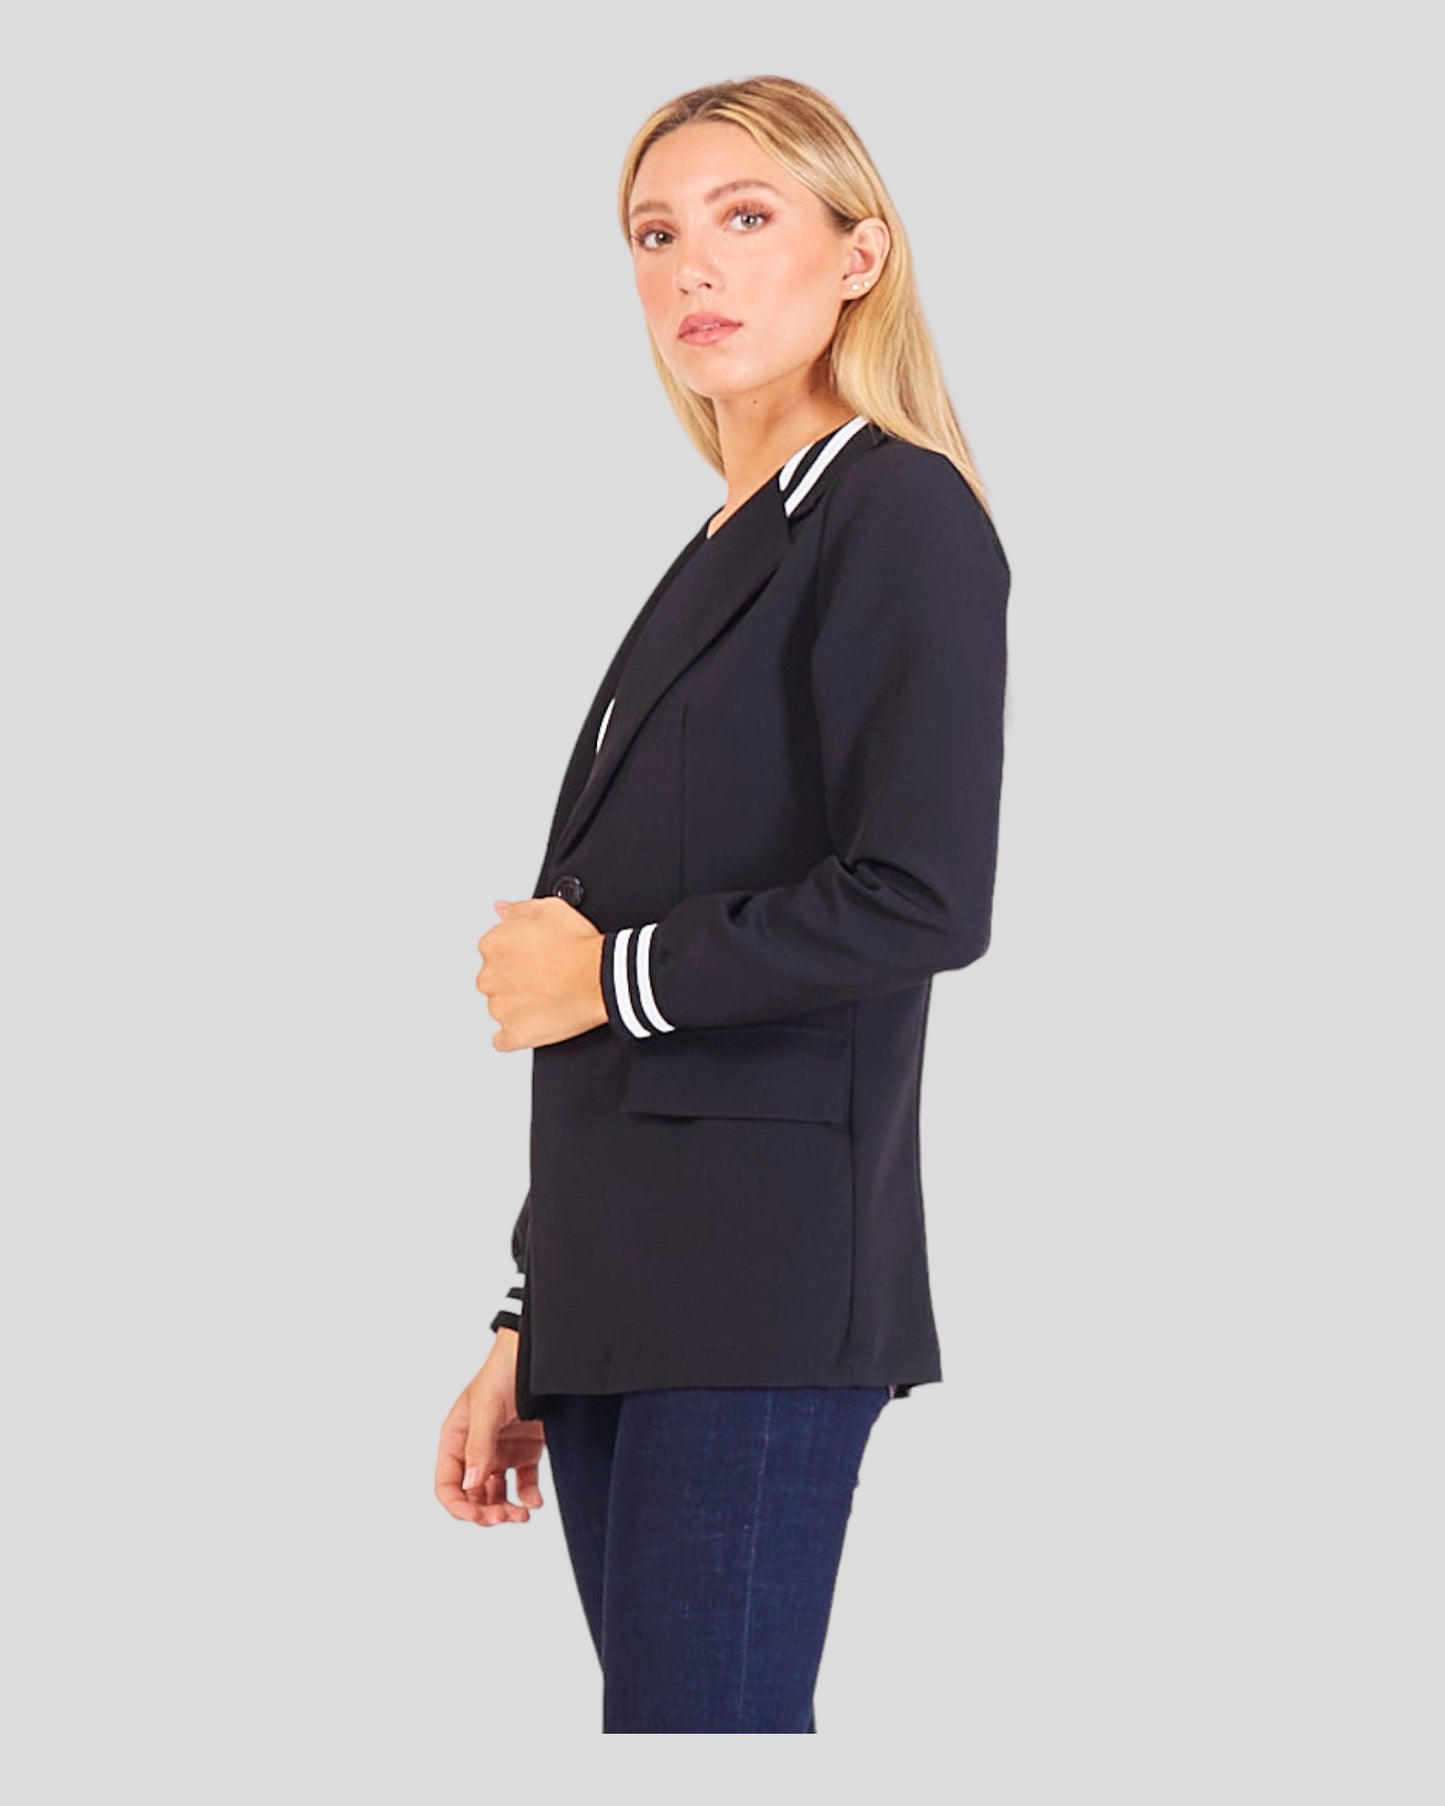 This image presents a Casual Sporty Blazer designed for effortless chic. Crafted from a light blend of cotton and viscose, it ensures comfortable wear. The blazer features distinctive stripes on the cuffs and collar, adding a sporty vibe to the overall look. The long collar contributes to a contemporary touch, while a one-button closure offers versatility and ease of wear.